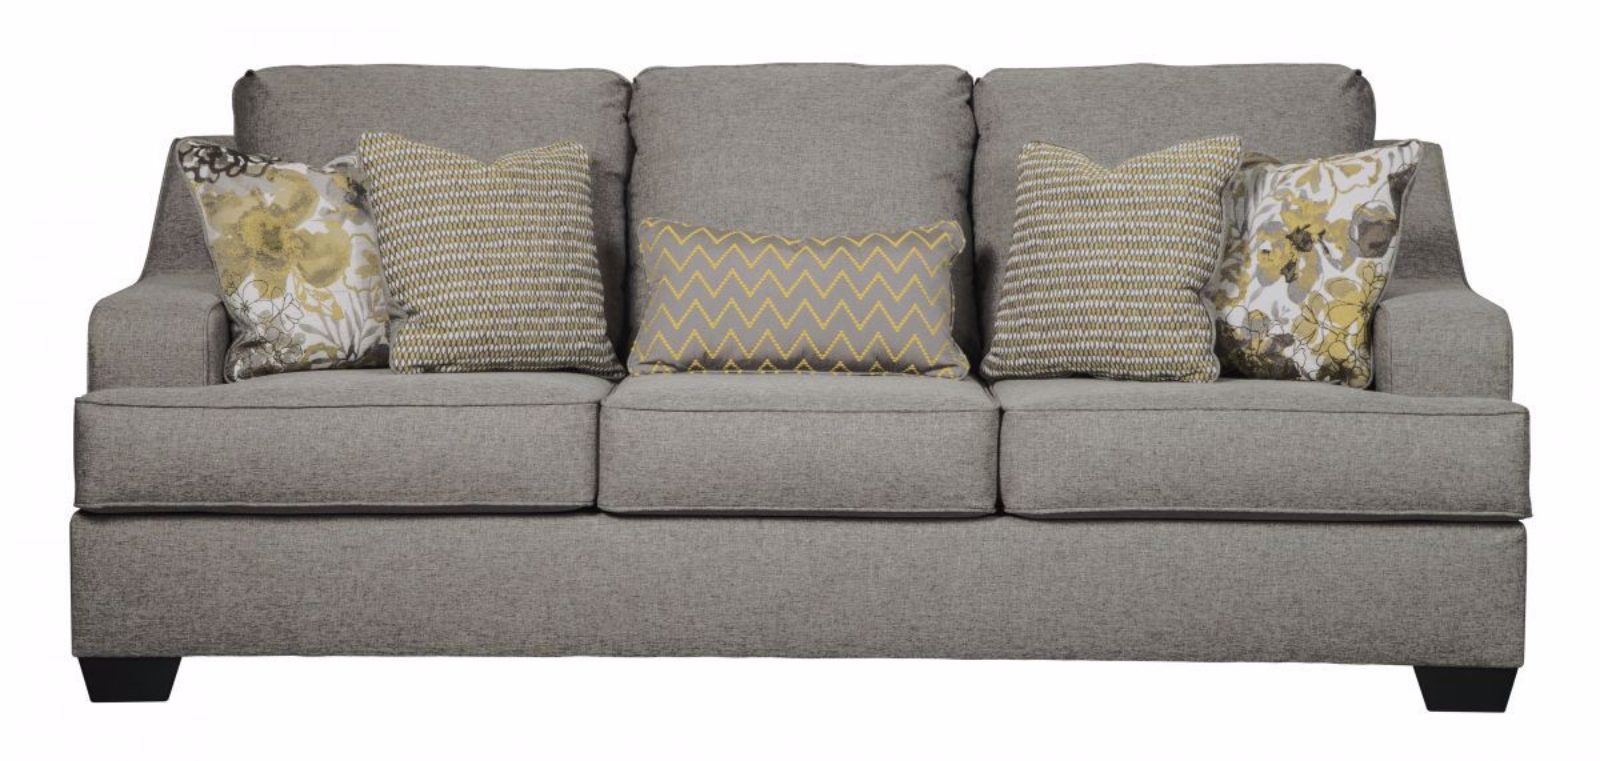 Picture of Mandee Sofa